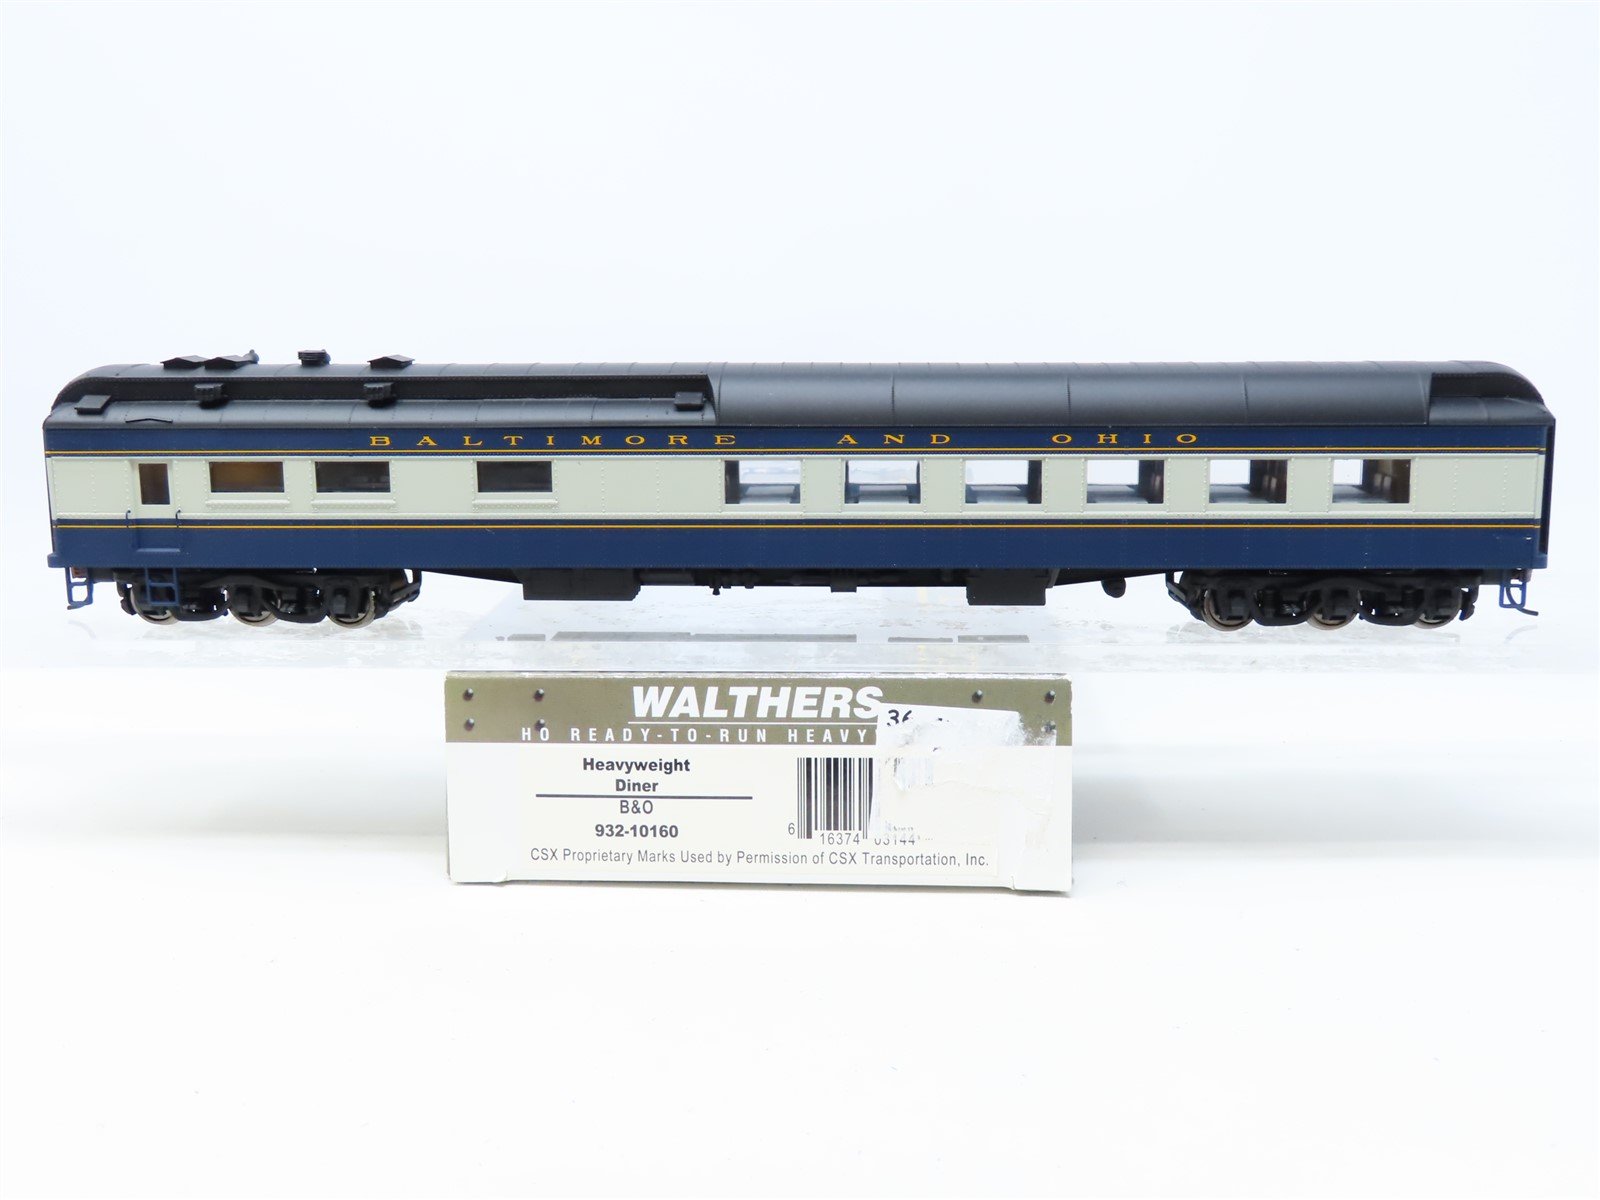 HO Scale Walthers #932-10160 B&O Baltimore & Ohio Heavyweight Diner Passenger